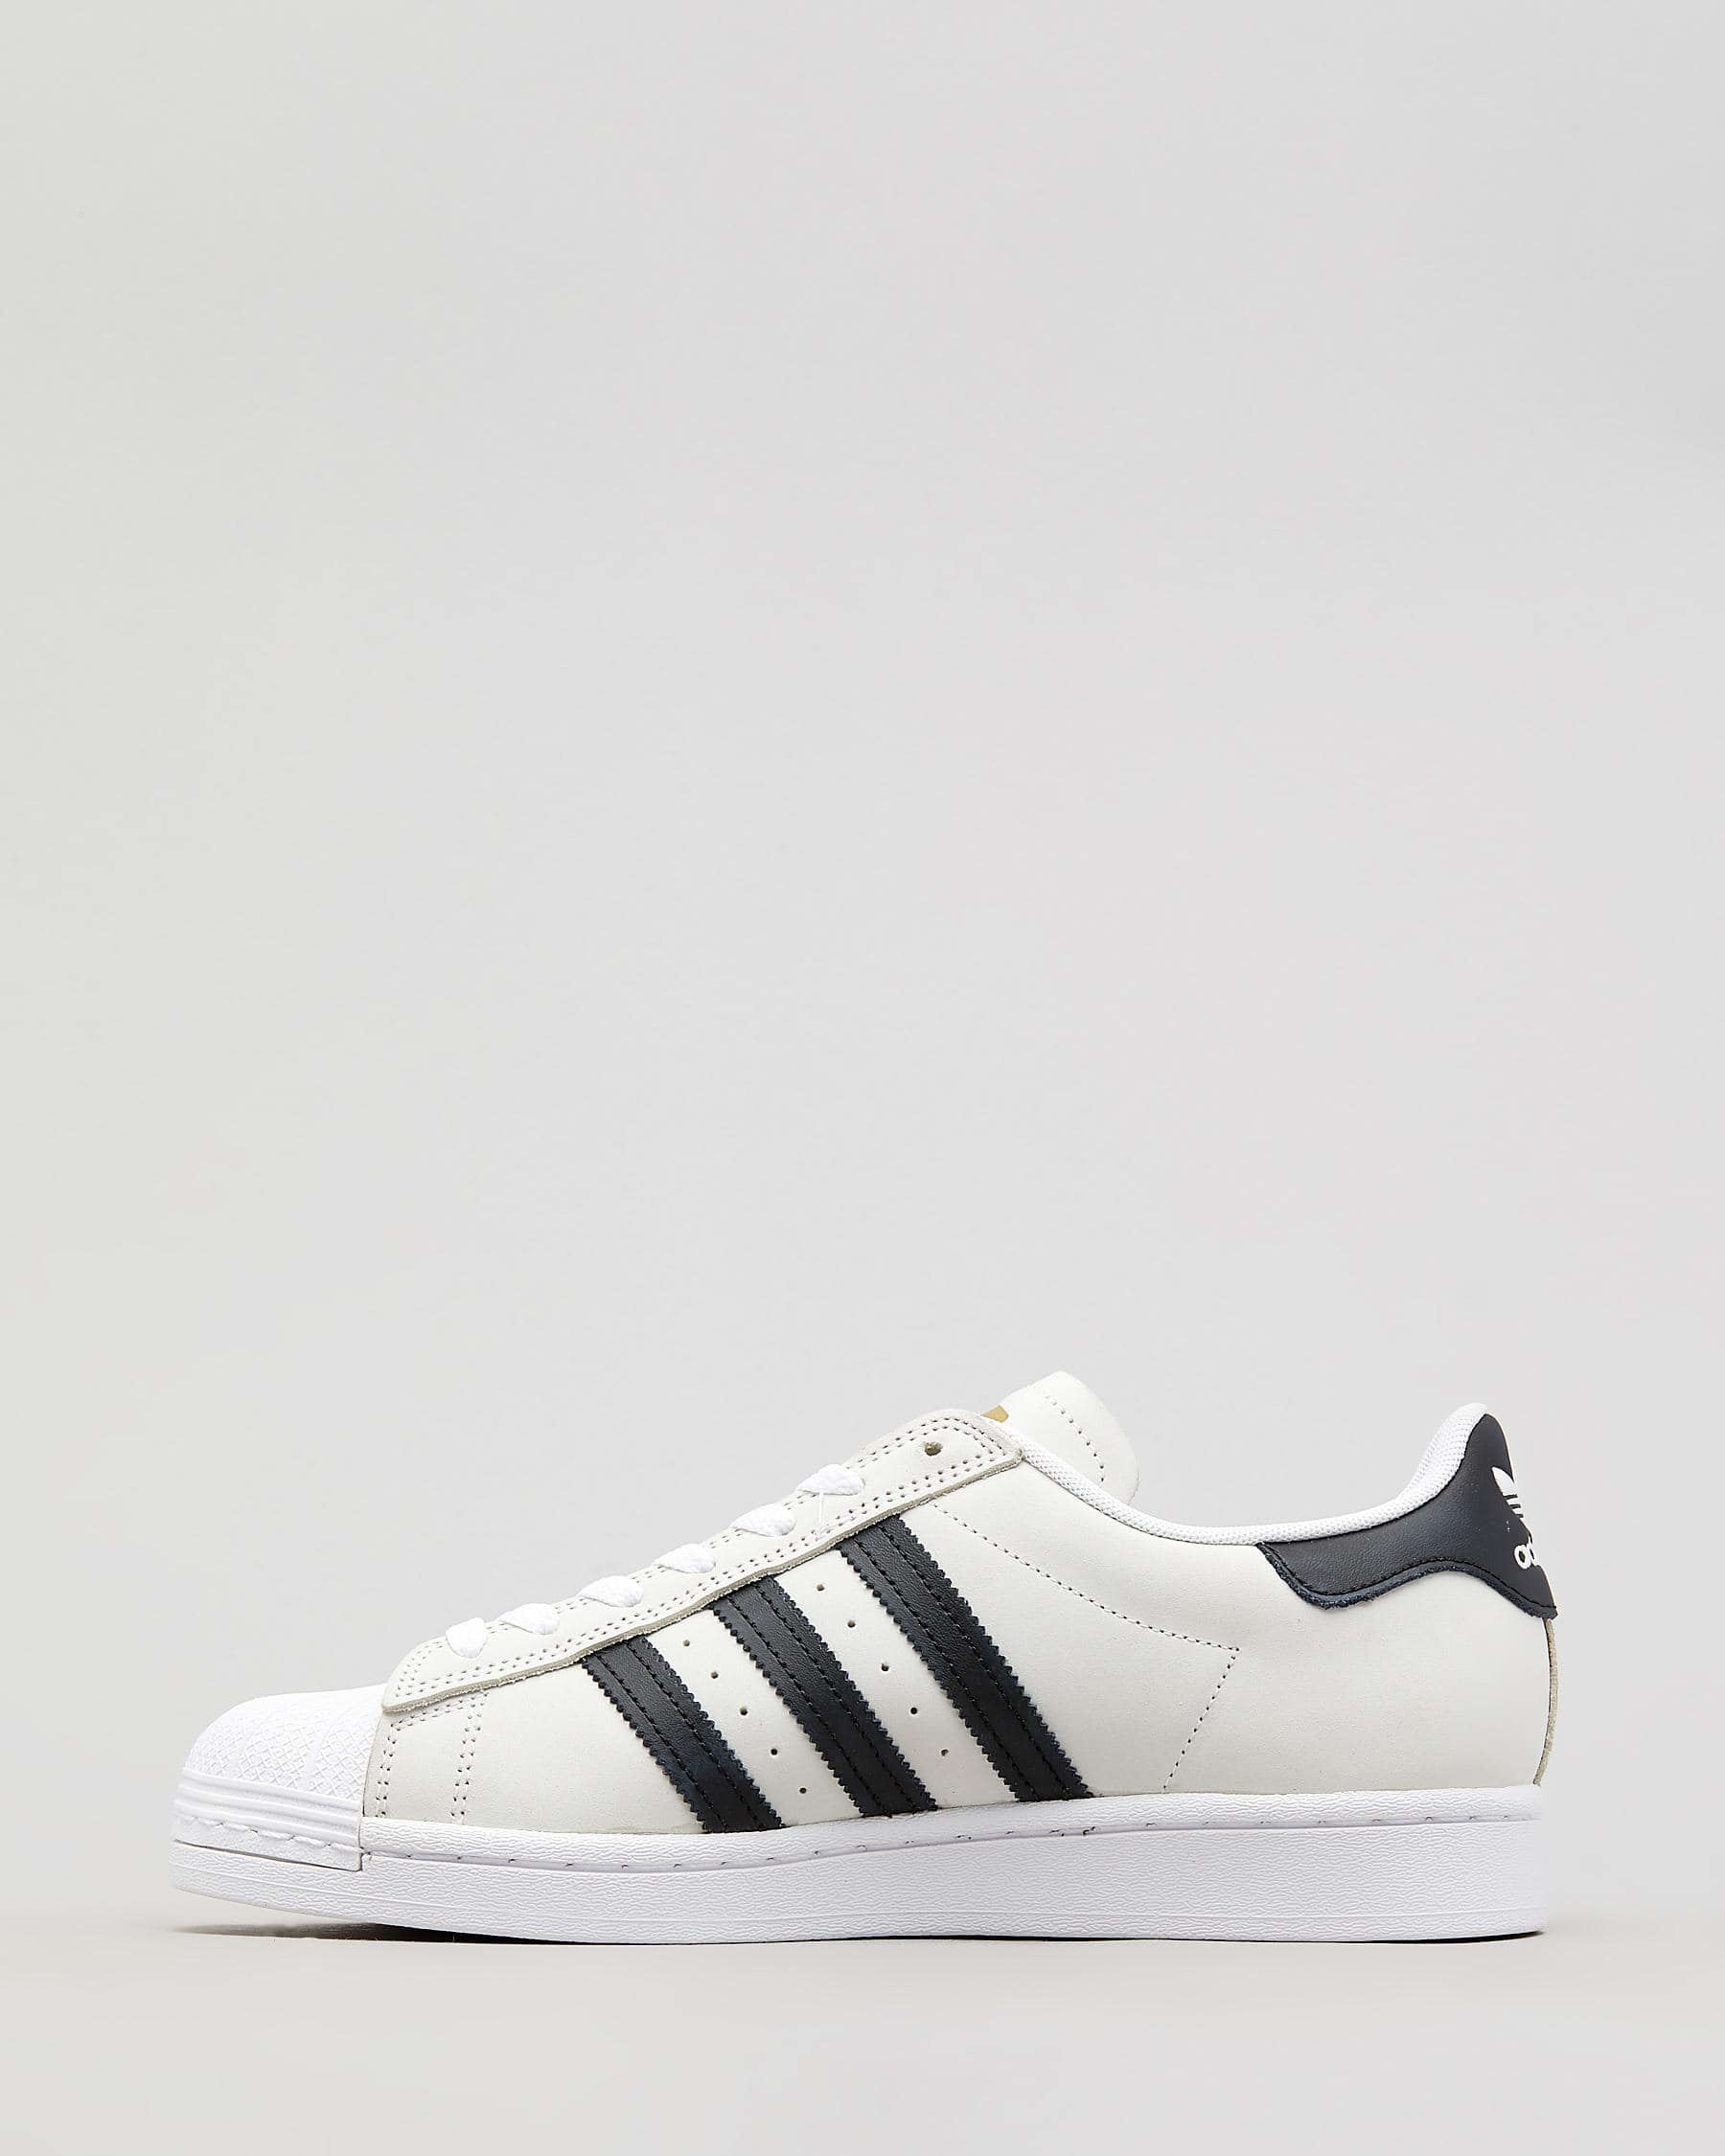 Adidas Superstar 505 Shoes In Ftwr White/core Black/gol - Fast Shipping ...